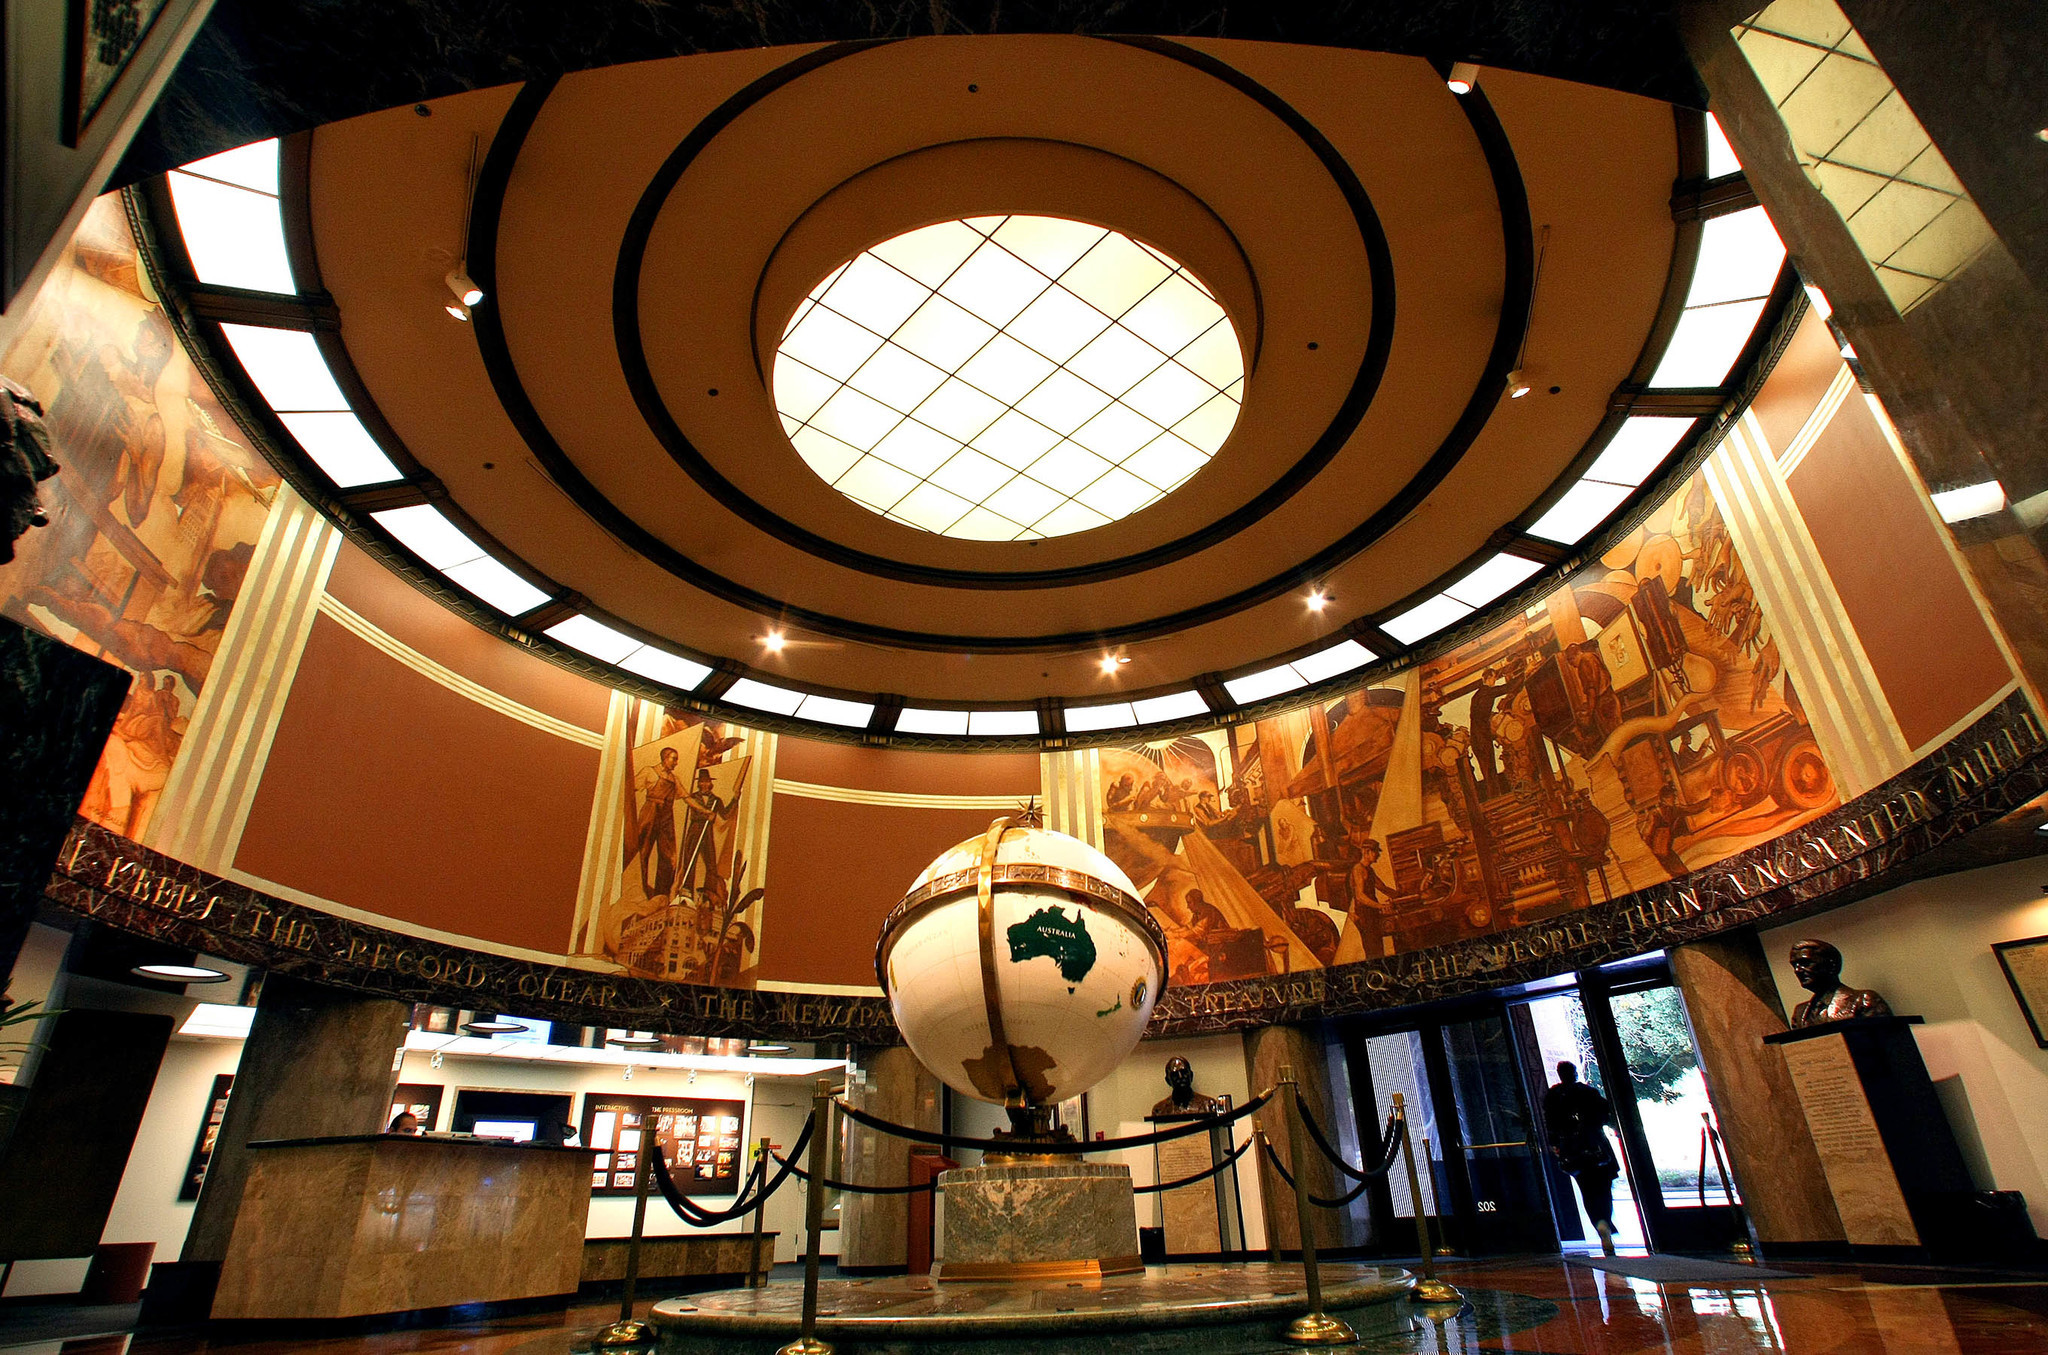 LOS ANGELES, CA-NOVEMBER 16, 2012: Overall, shows the globe lobby inside the Los Angeles Times in